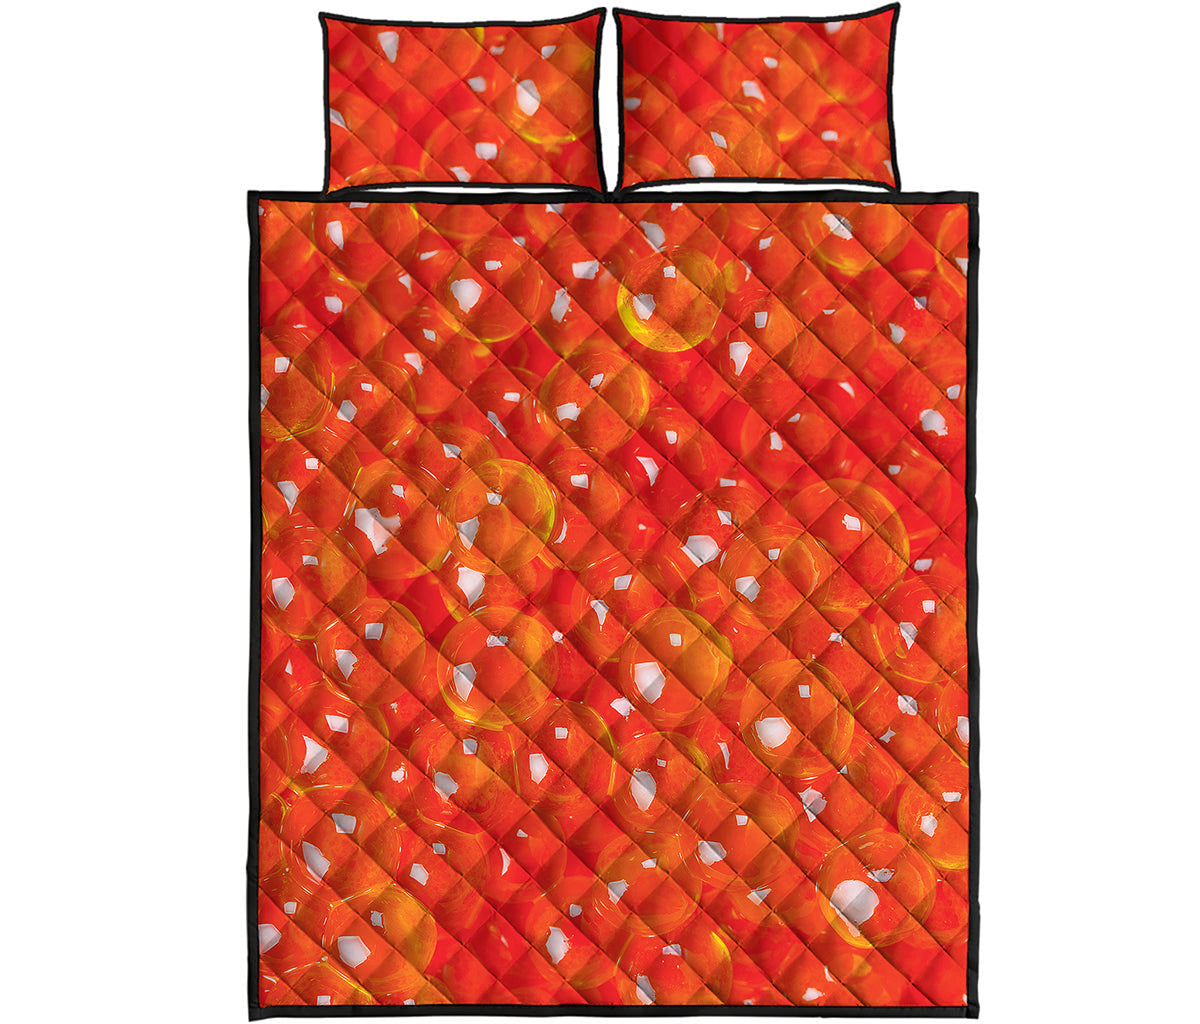 Salmon Roe Print Quilt Bed Set